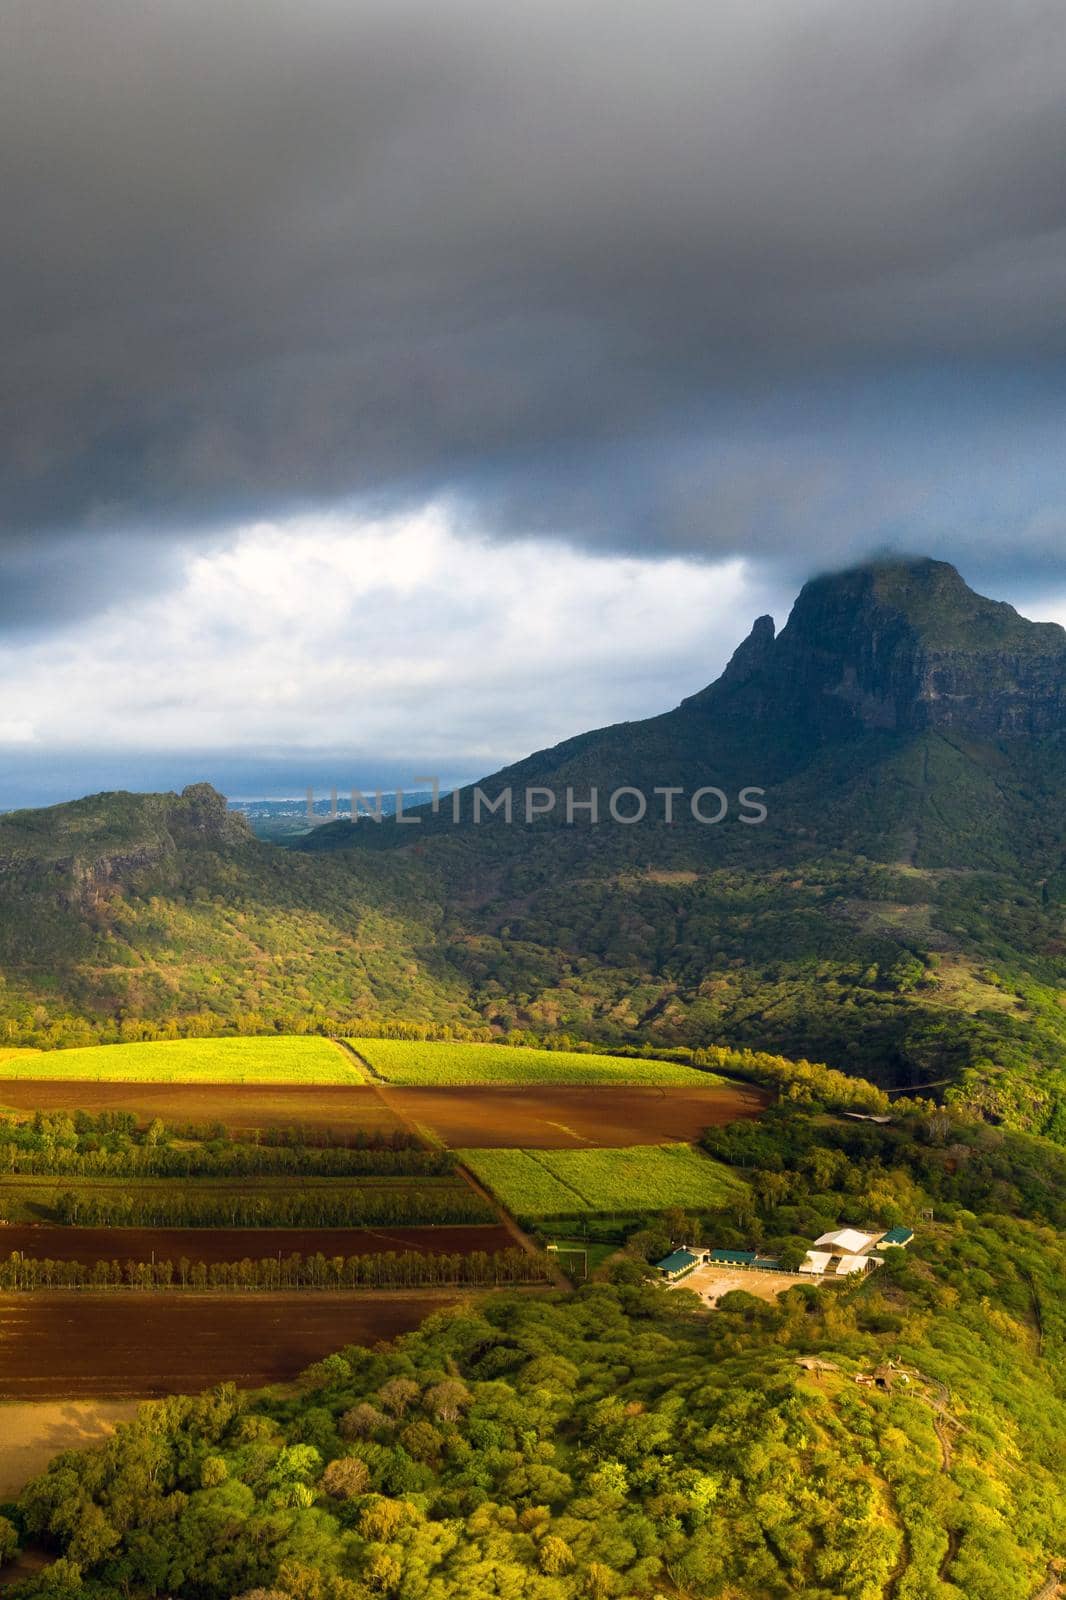 View from the height of the sown fields located on the island of Mauritius by Lobachad